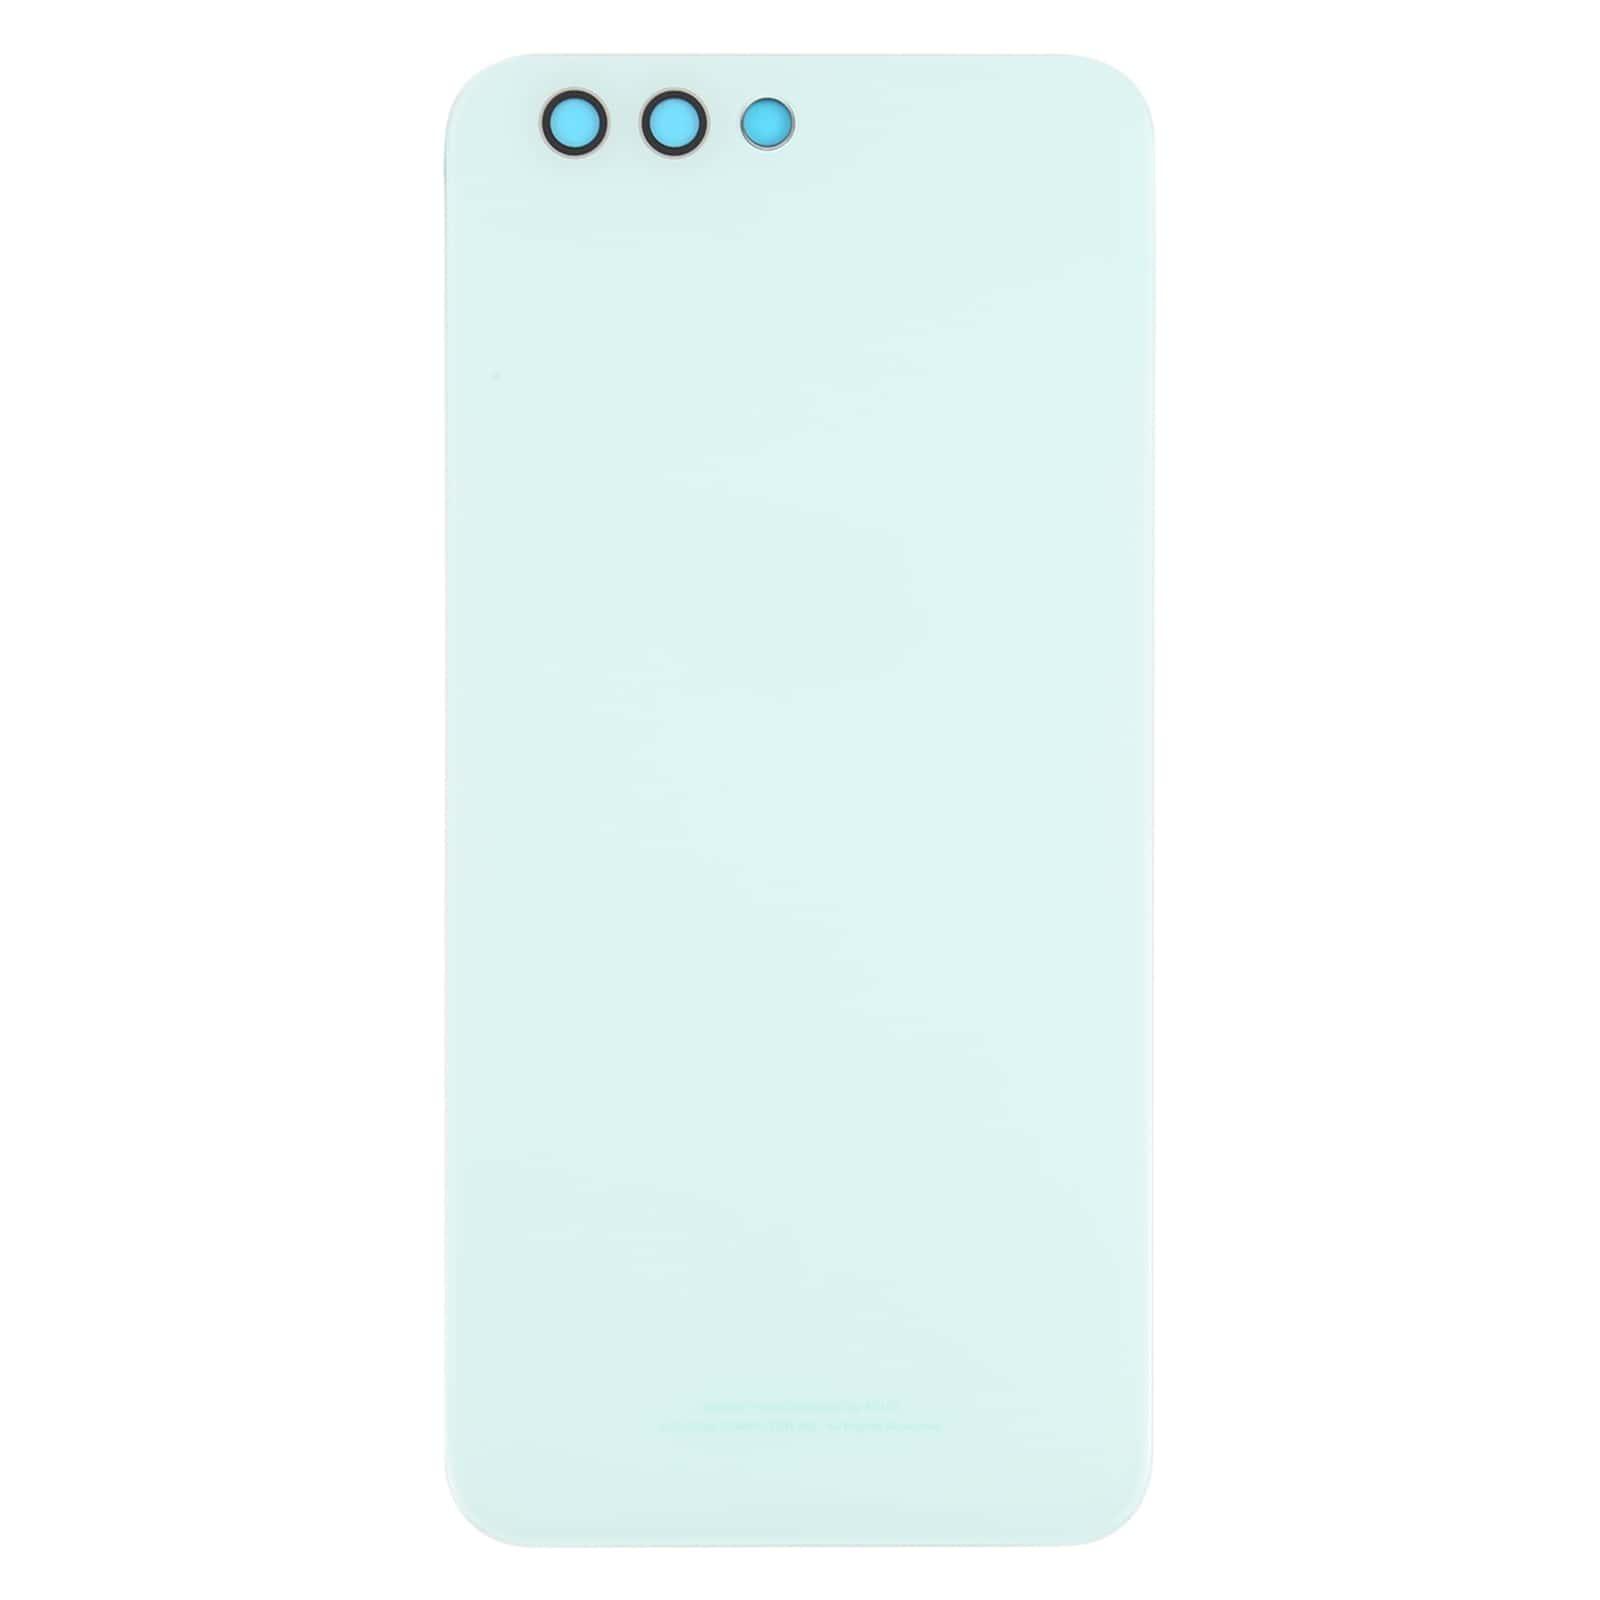 Back Panel Housing Body for Asus ZenFone 4 ZE554KL Green with Camera Lens